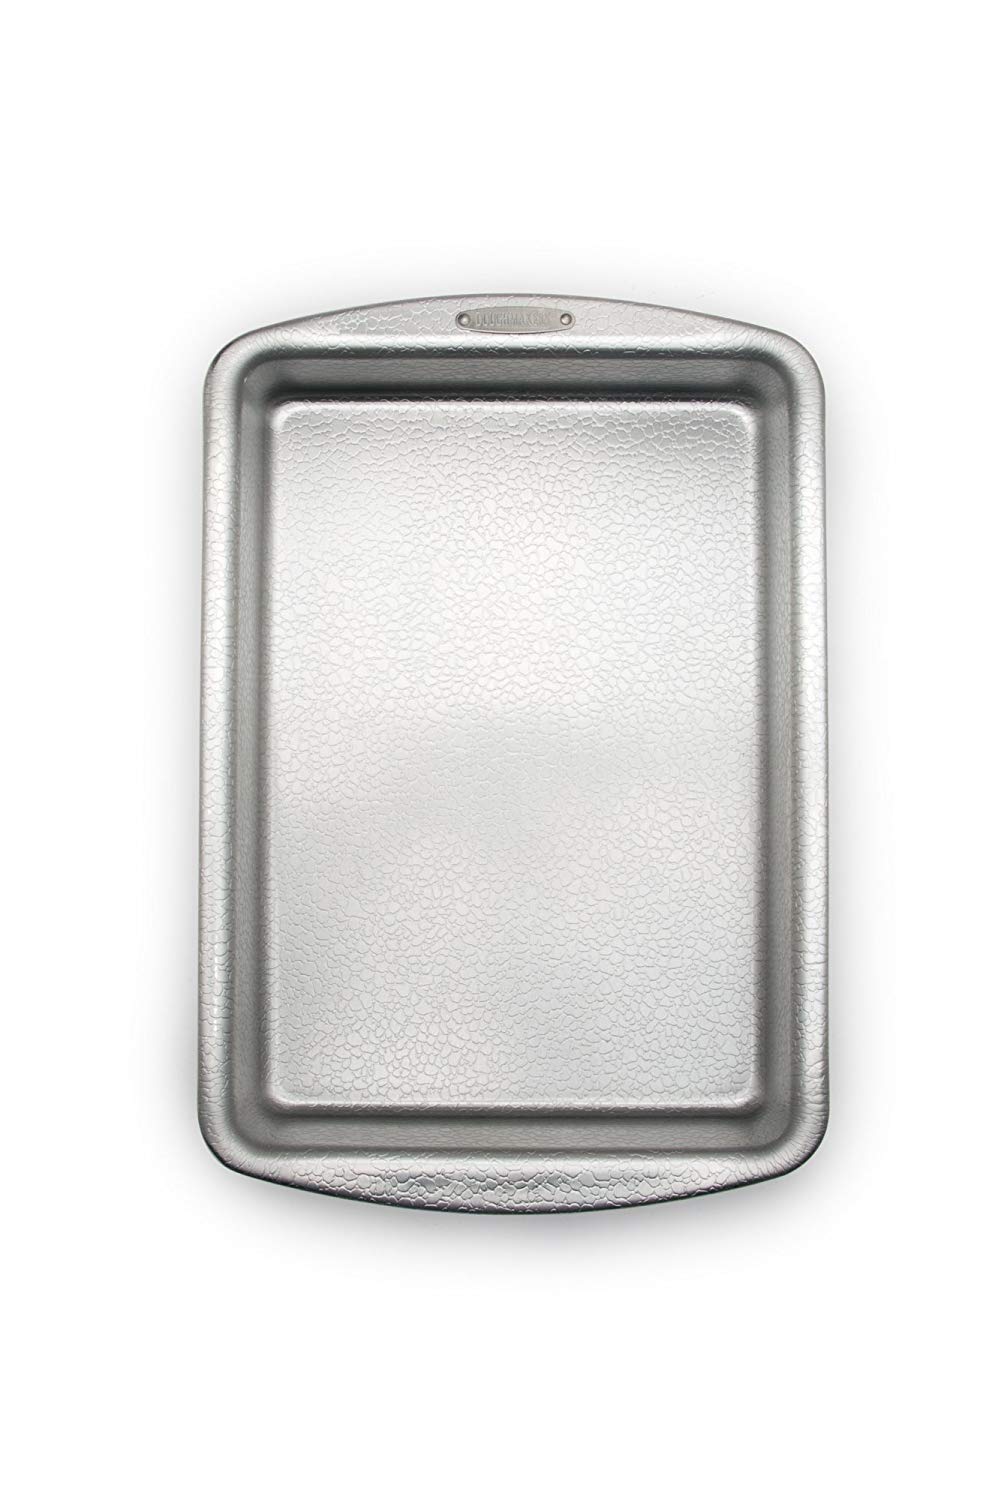 Fox Run Stainless Steel 6 Cup Muffin Pan, Silver